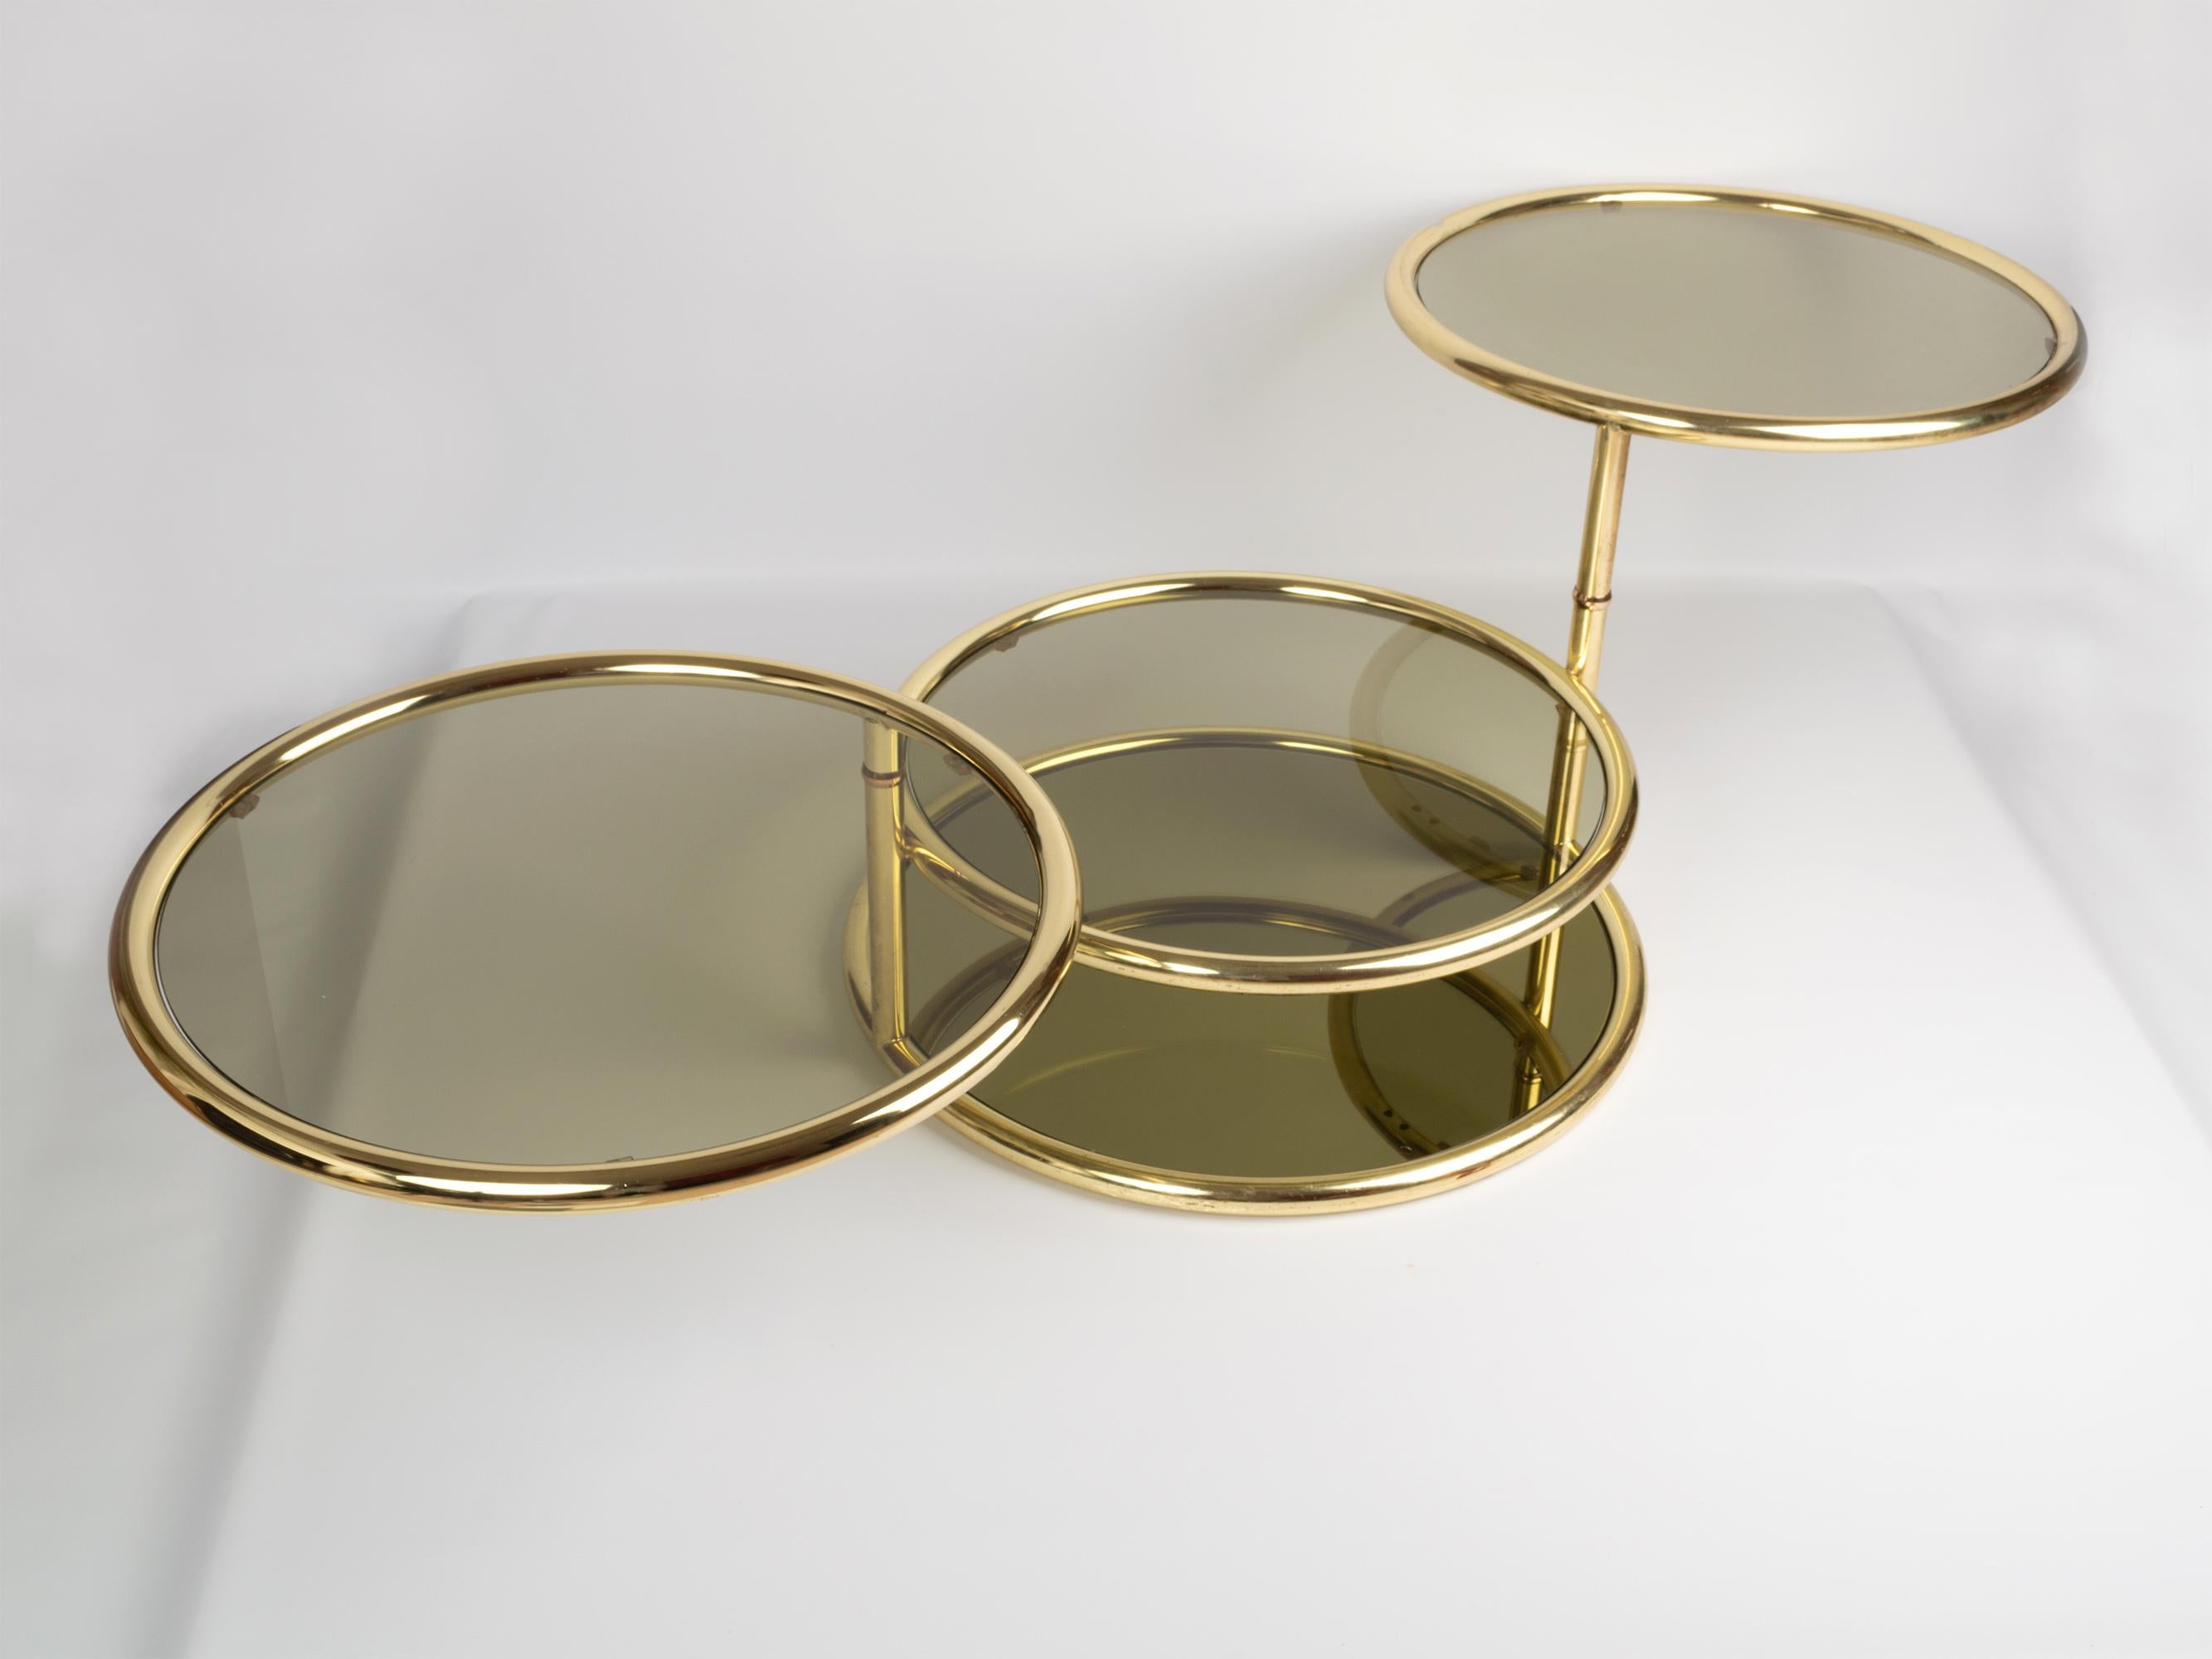 Midcentury circular brass swivel tiered coffee cocktail table, attributed to DIA, USA, circa 1970.
Polished brass and smoked glass.
Dimensions:
H 46 x D 70 x W 187cm fully expanded.
Wear consistent with age and use, expected areas of tarnish and